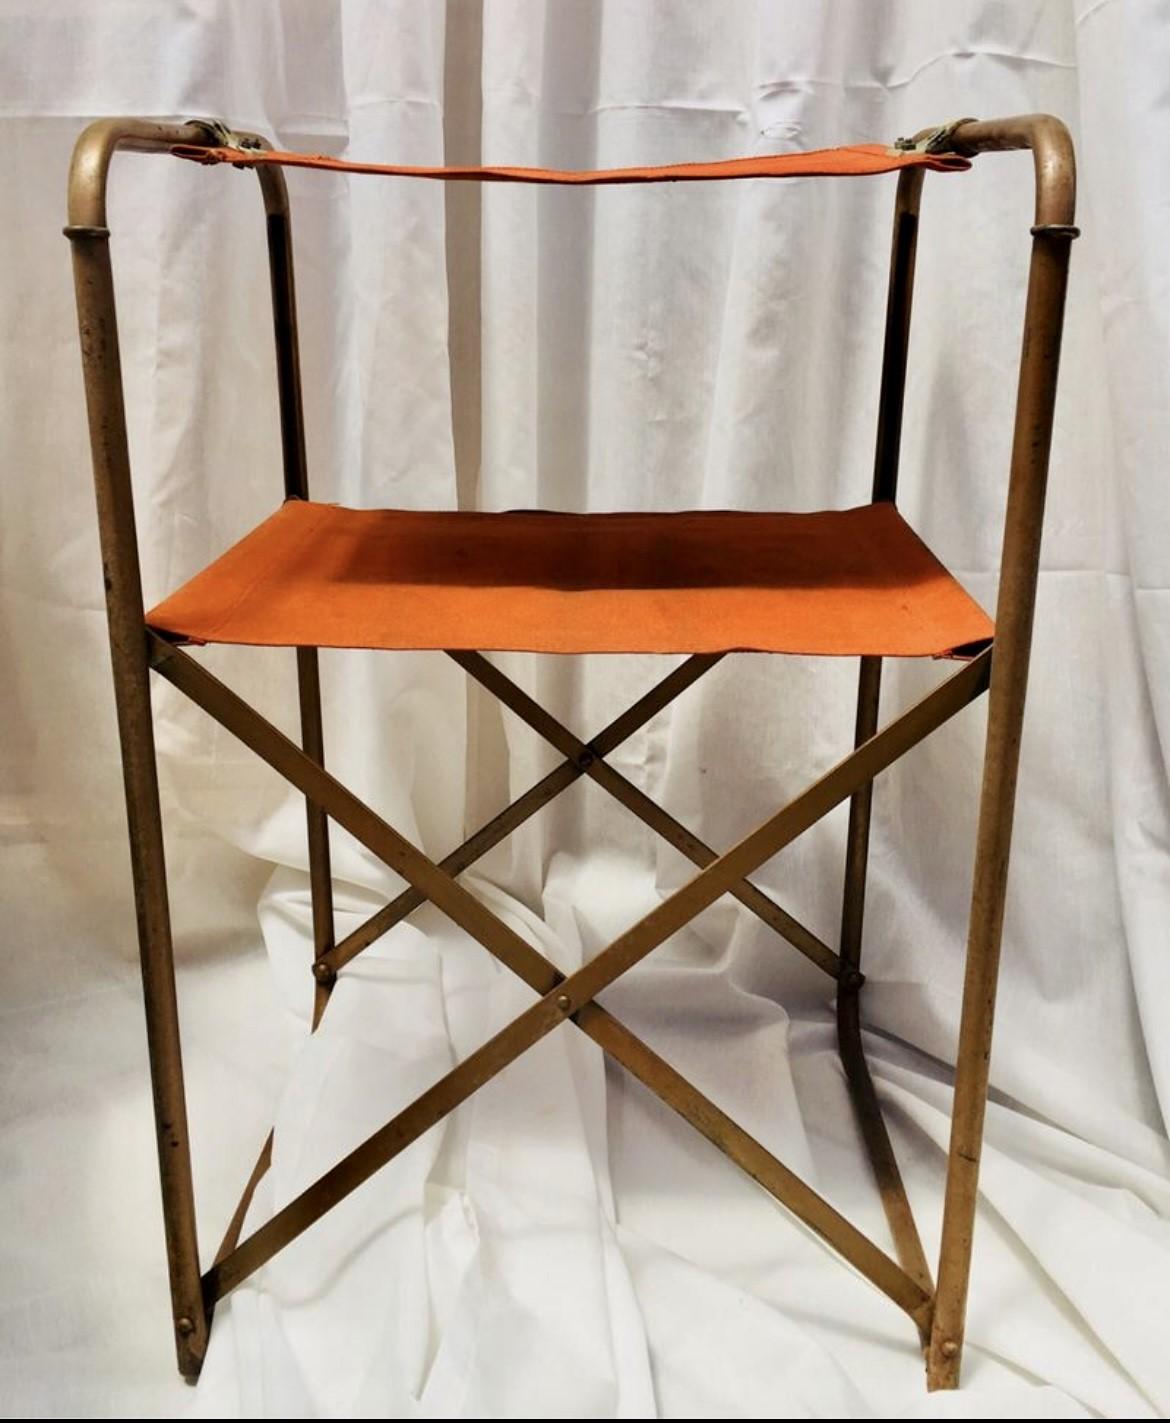 These pair of camping folding chairs called Miss France, were made of brass metal and canvas in orange color and they are a very good example of the old Hollywood style. 
In 1954 the brand Lafuma presented its first line of portable outdoor